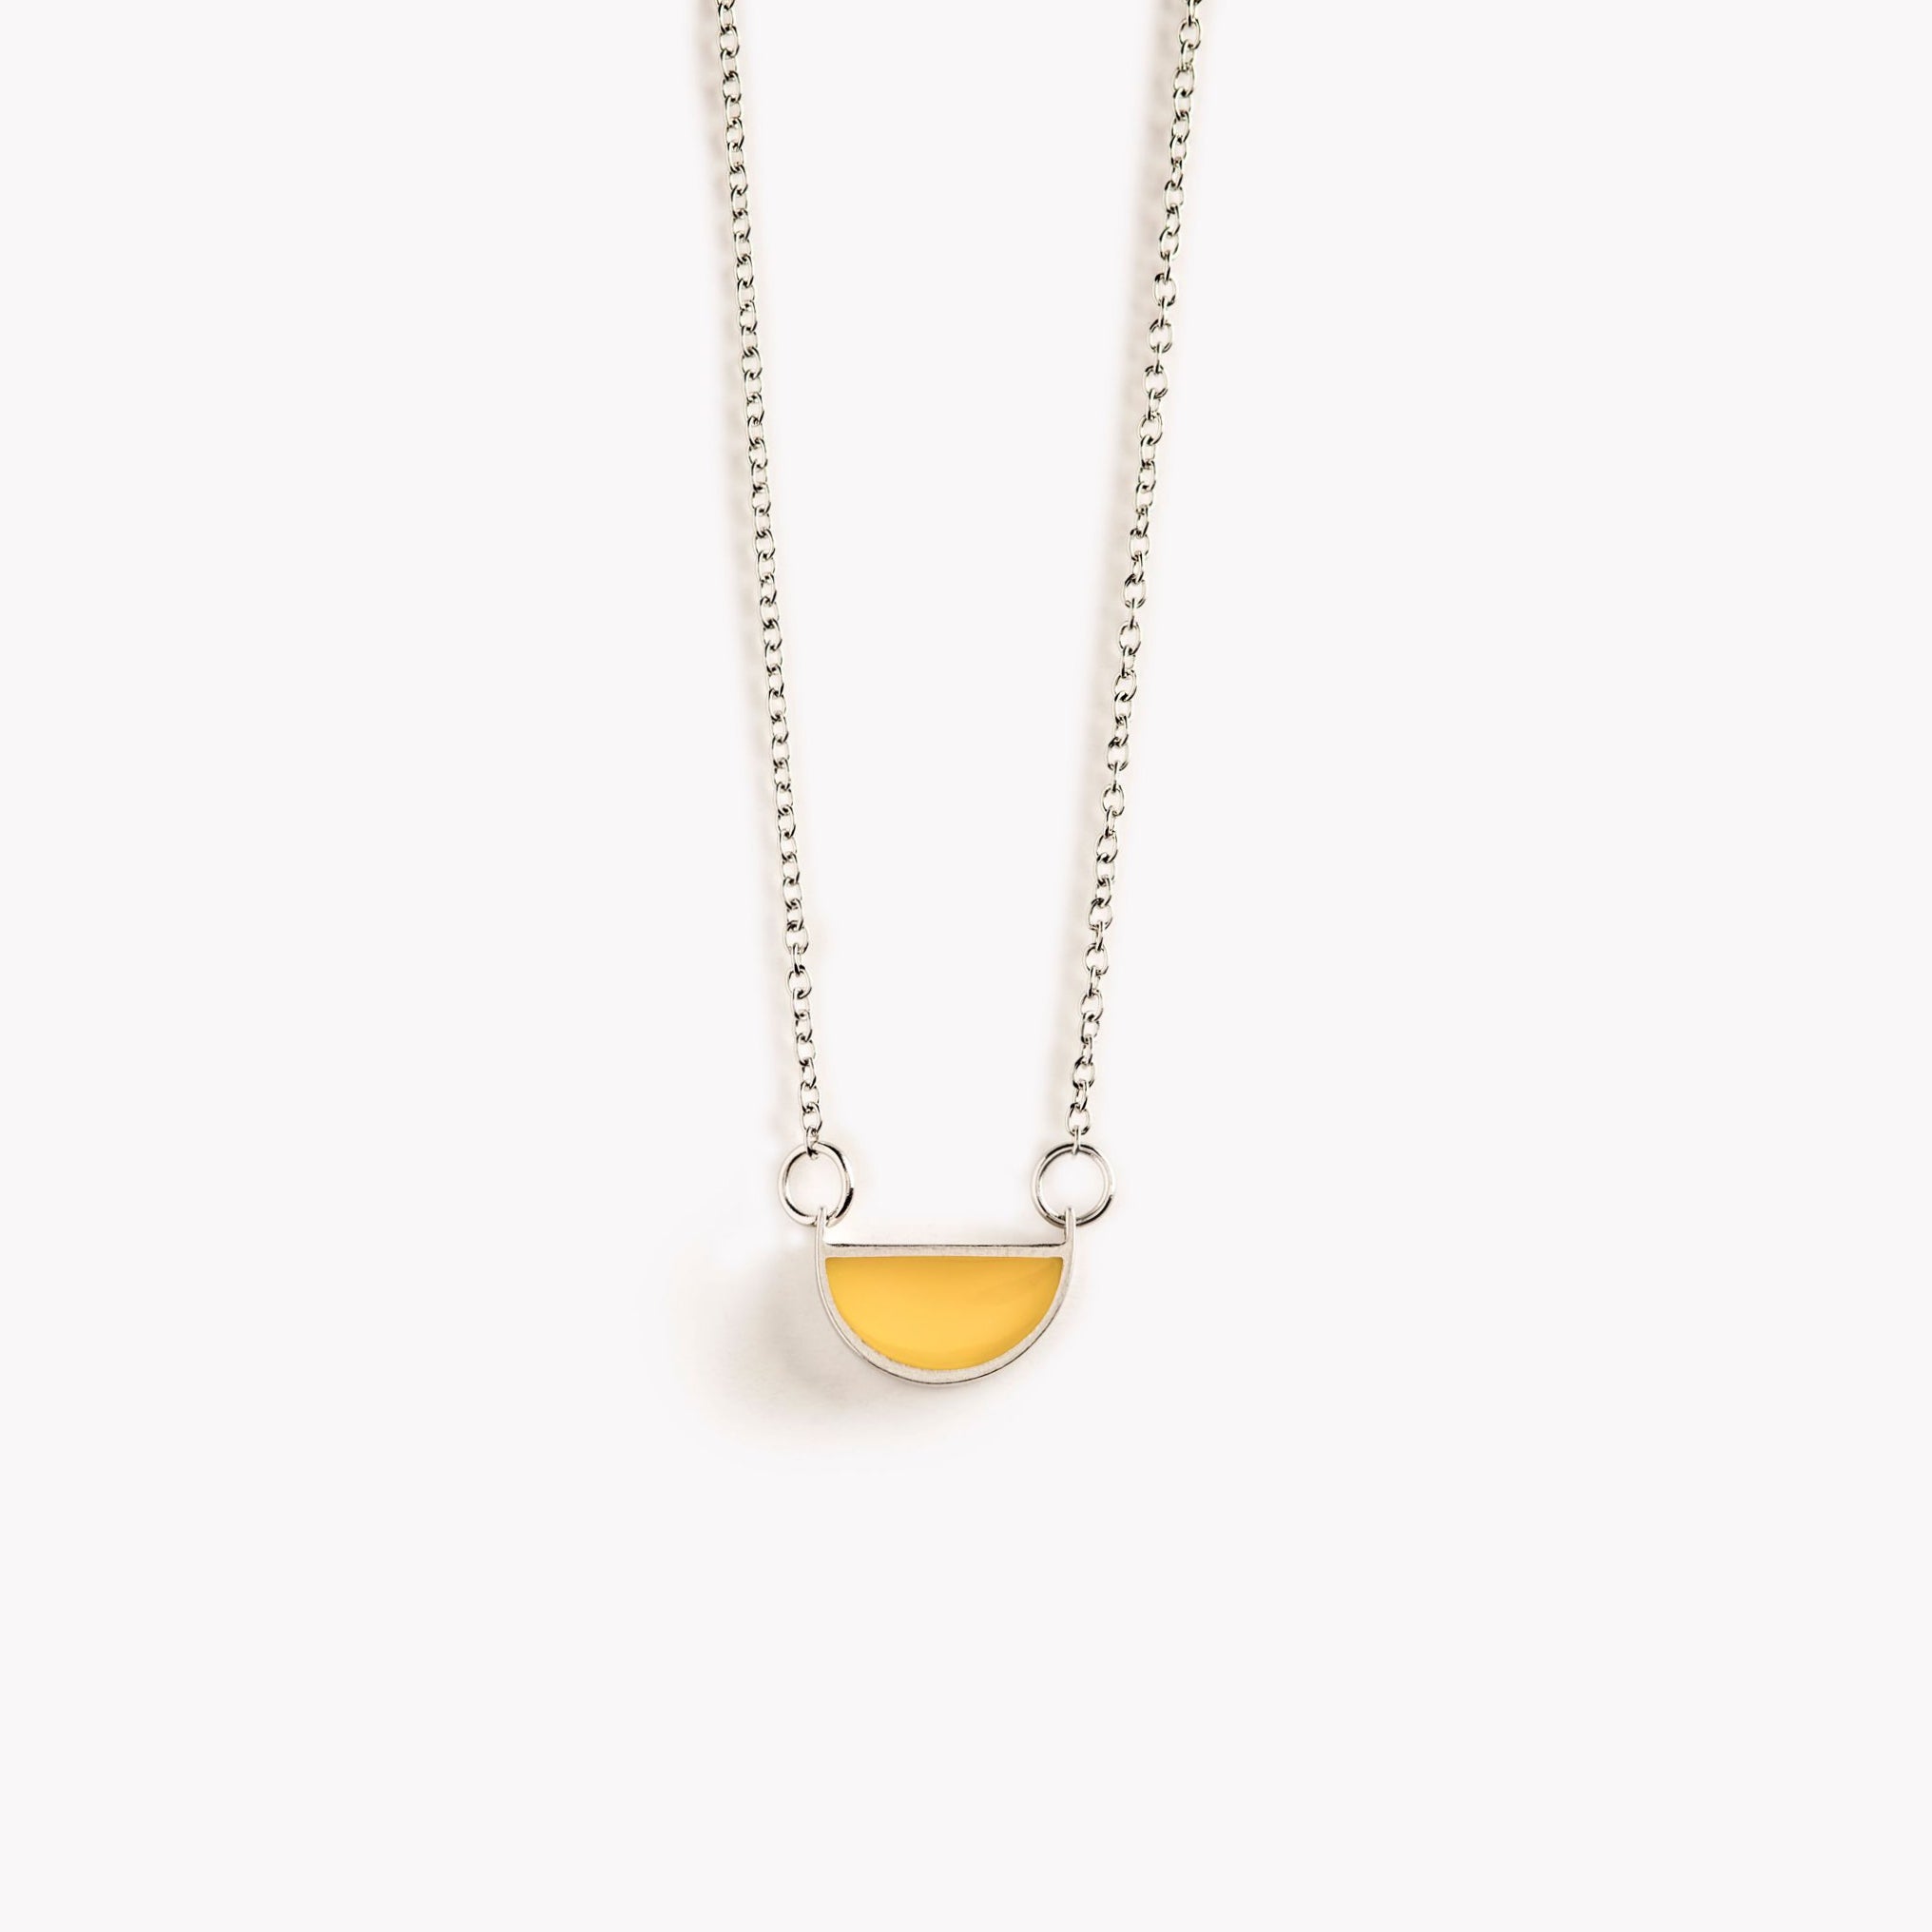 A simple, bright yellow, half circle shaped pendant necklace.